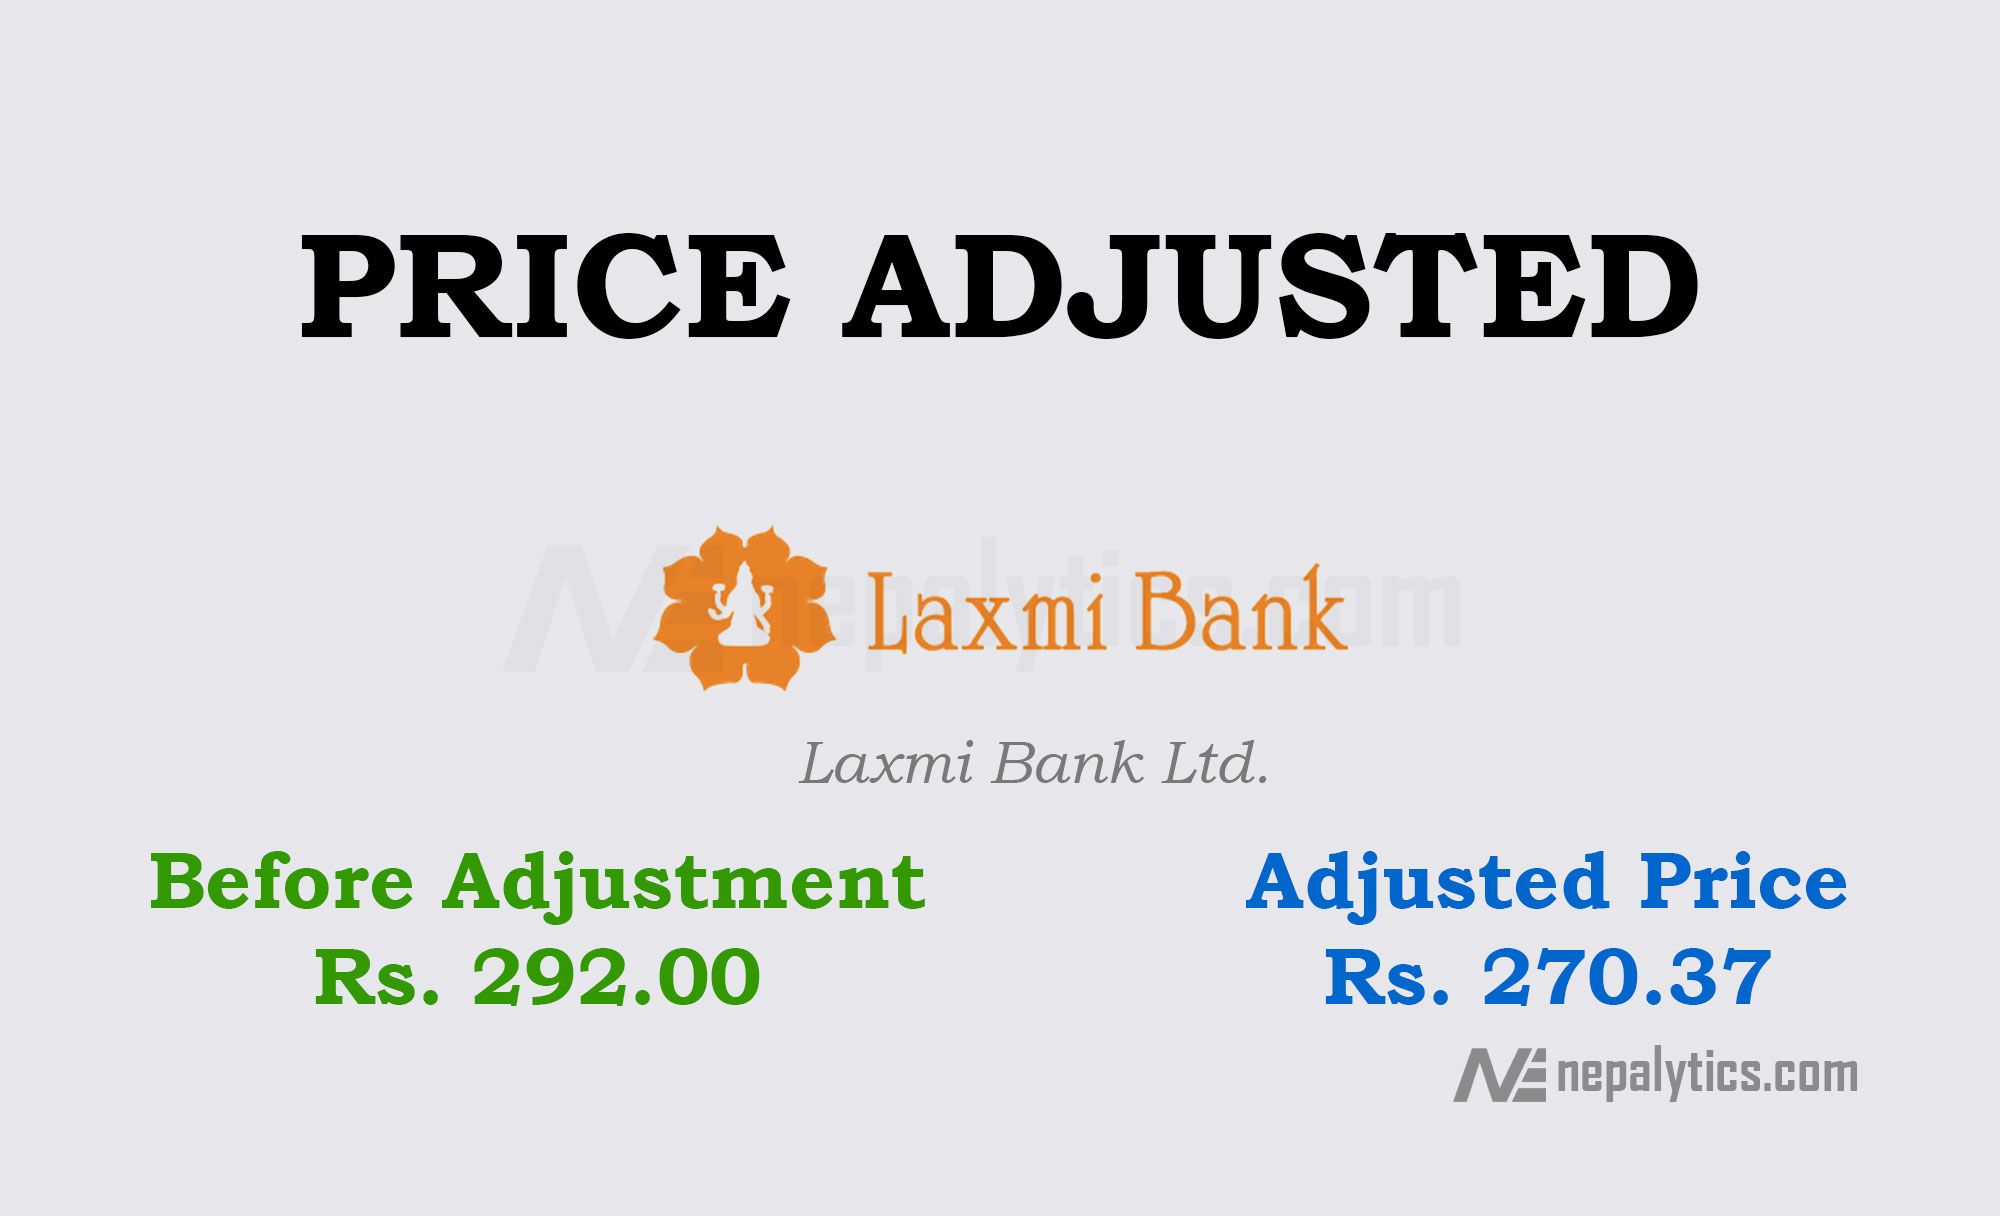 Adjusted Price for Laxmi Bank Limited is Rs. 270.37 for 8 % of Bonus Share.